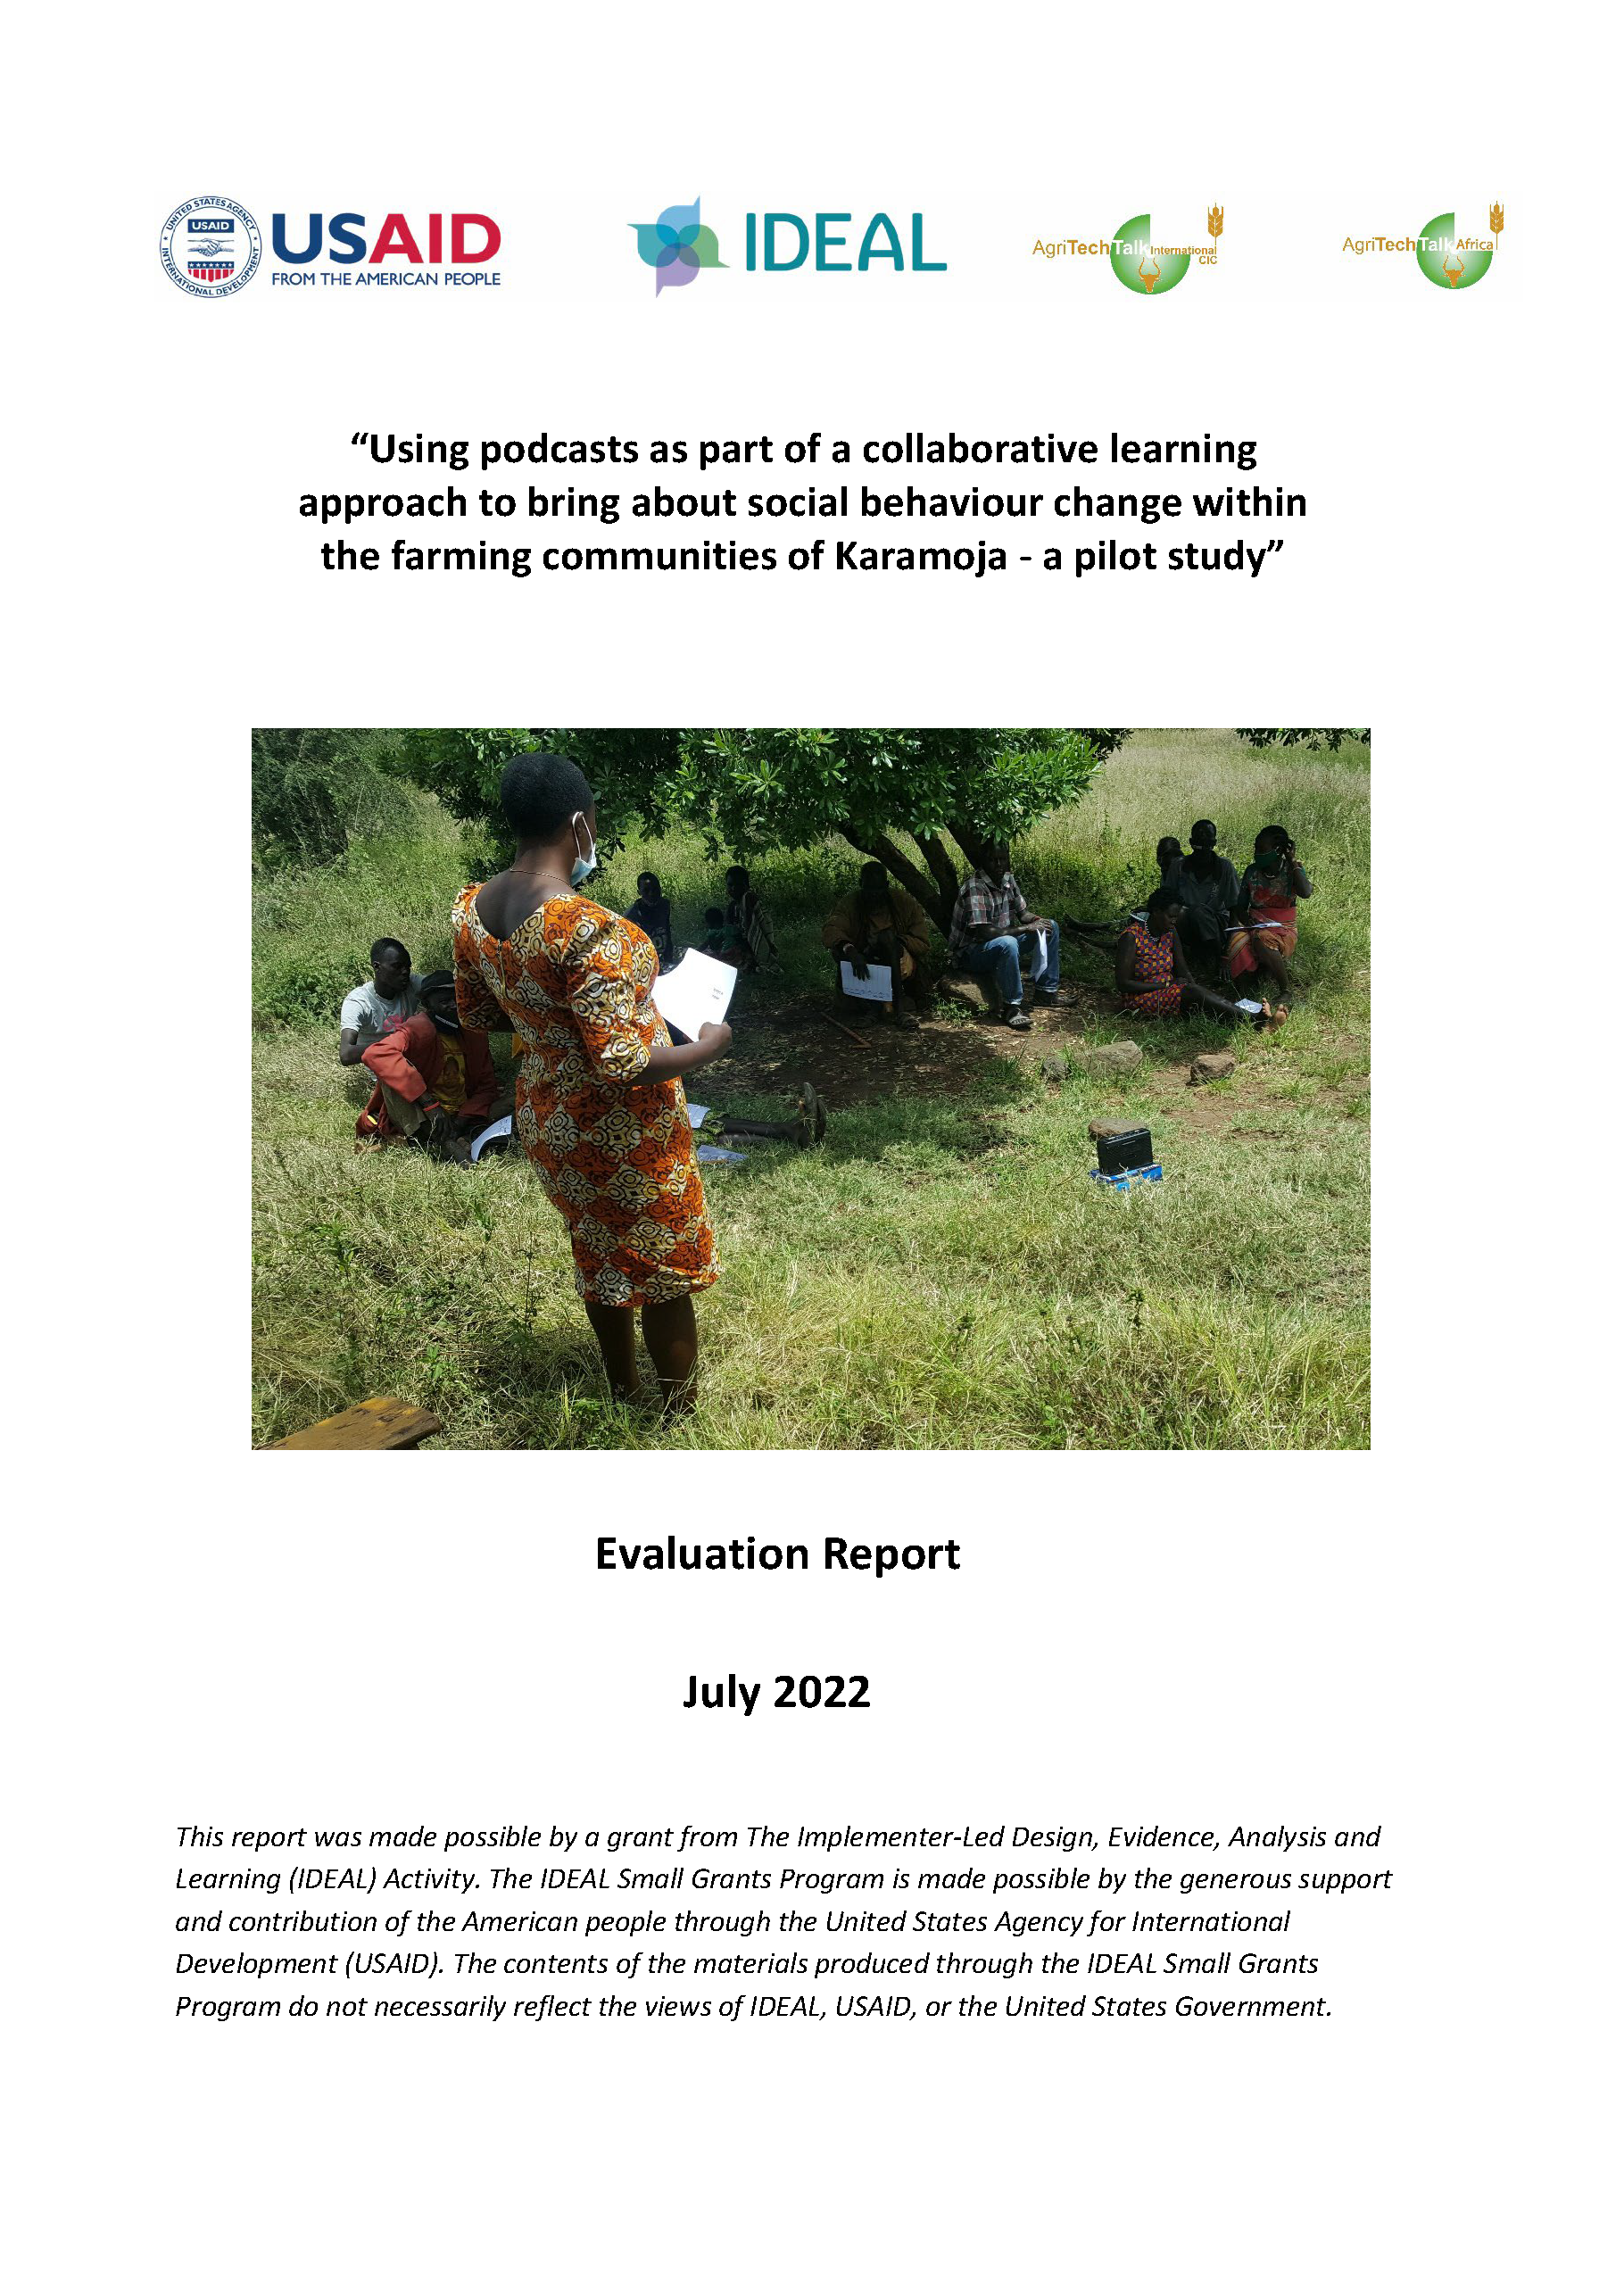 Cover page for “Final Evaluation Report: Using podcasts as part of a collaborative learning approach to bring about Social and Behaviour Change within the farming communities of Karamoja